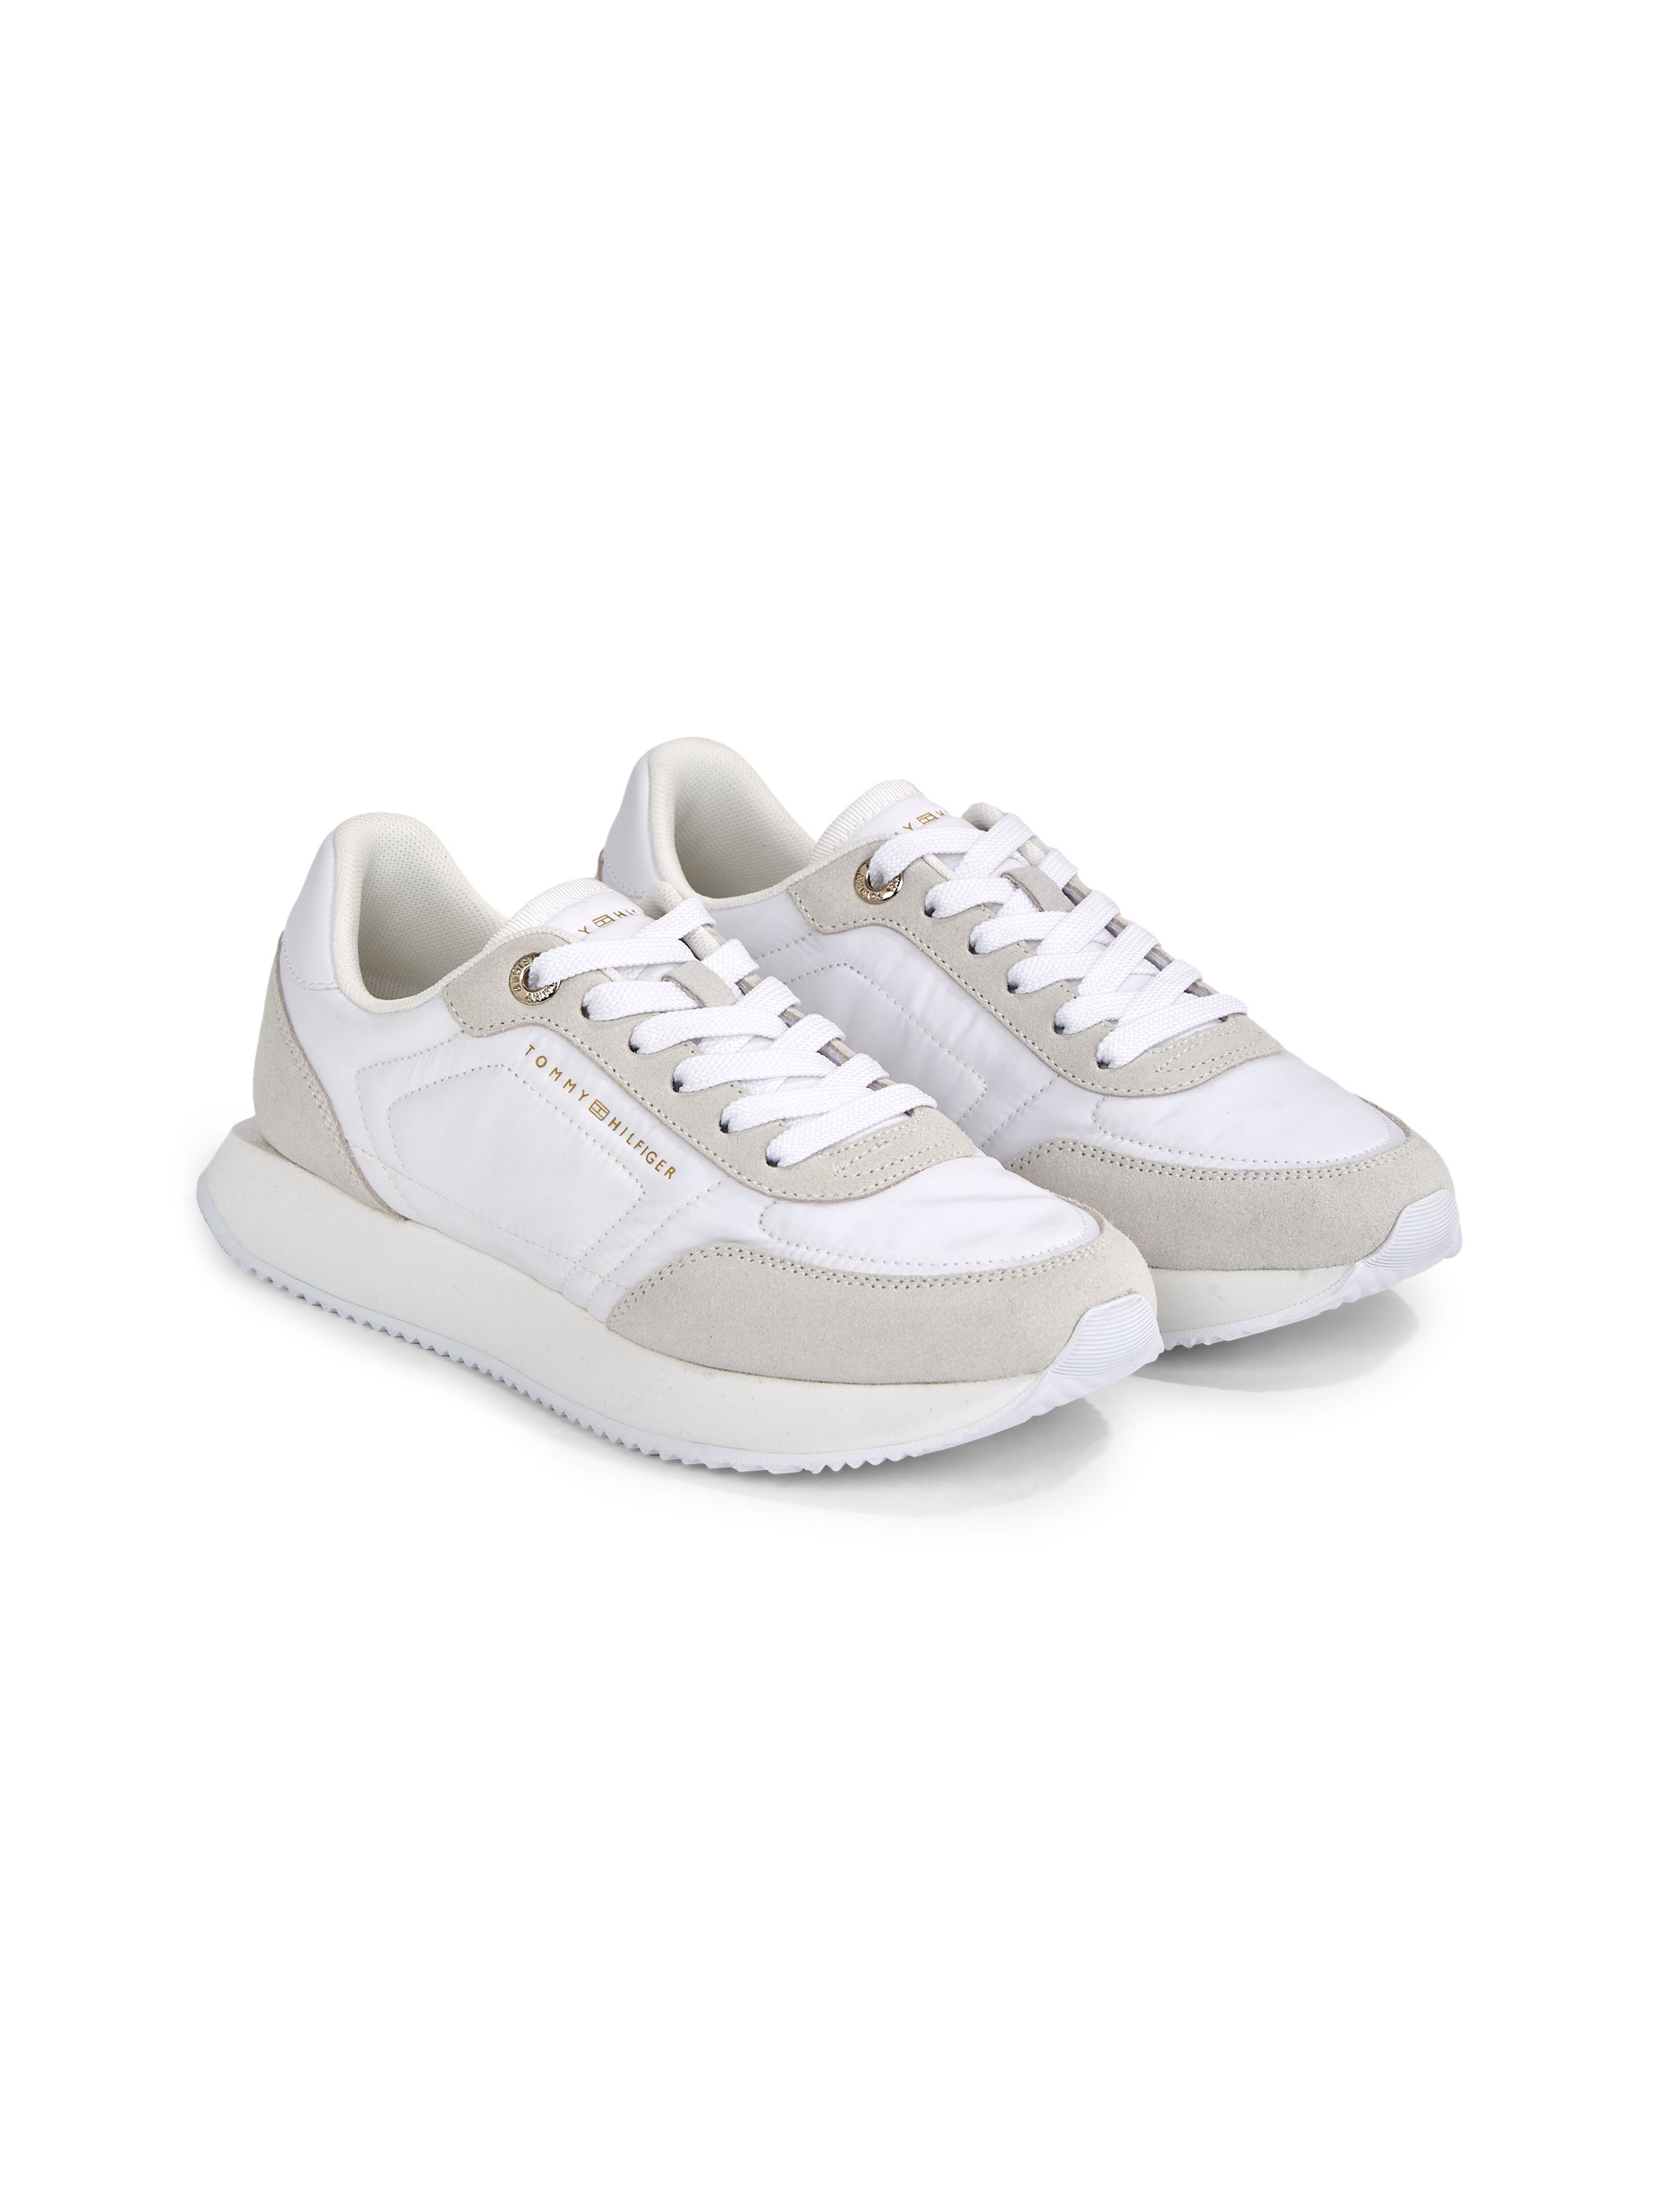 Tommy Hilfiger Women's Runner Trainers